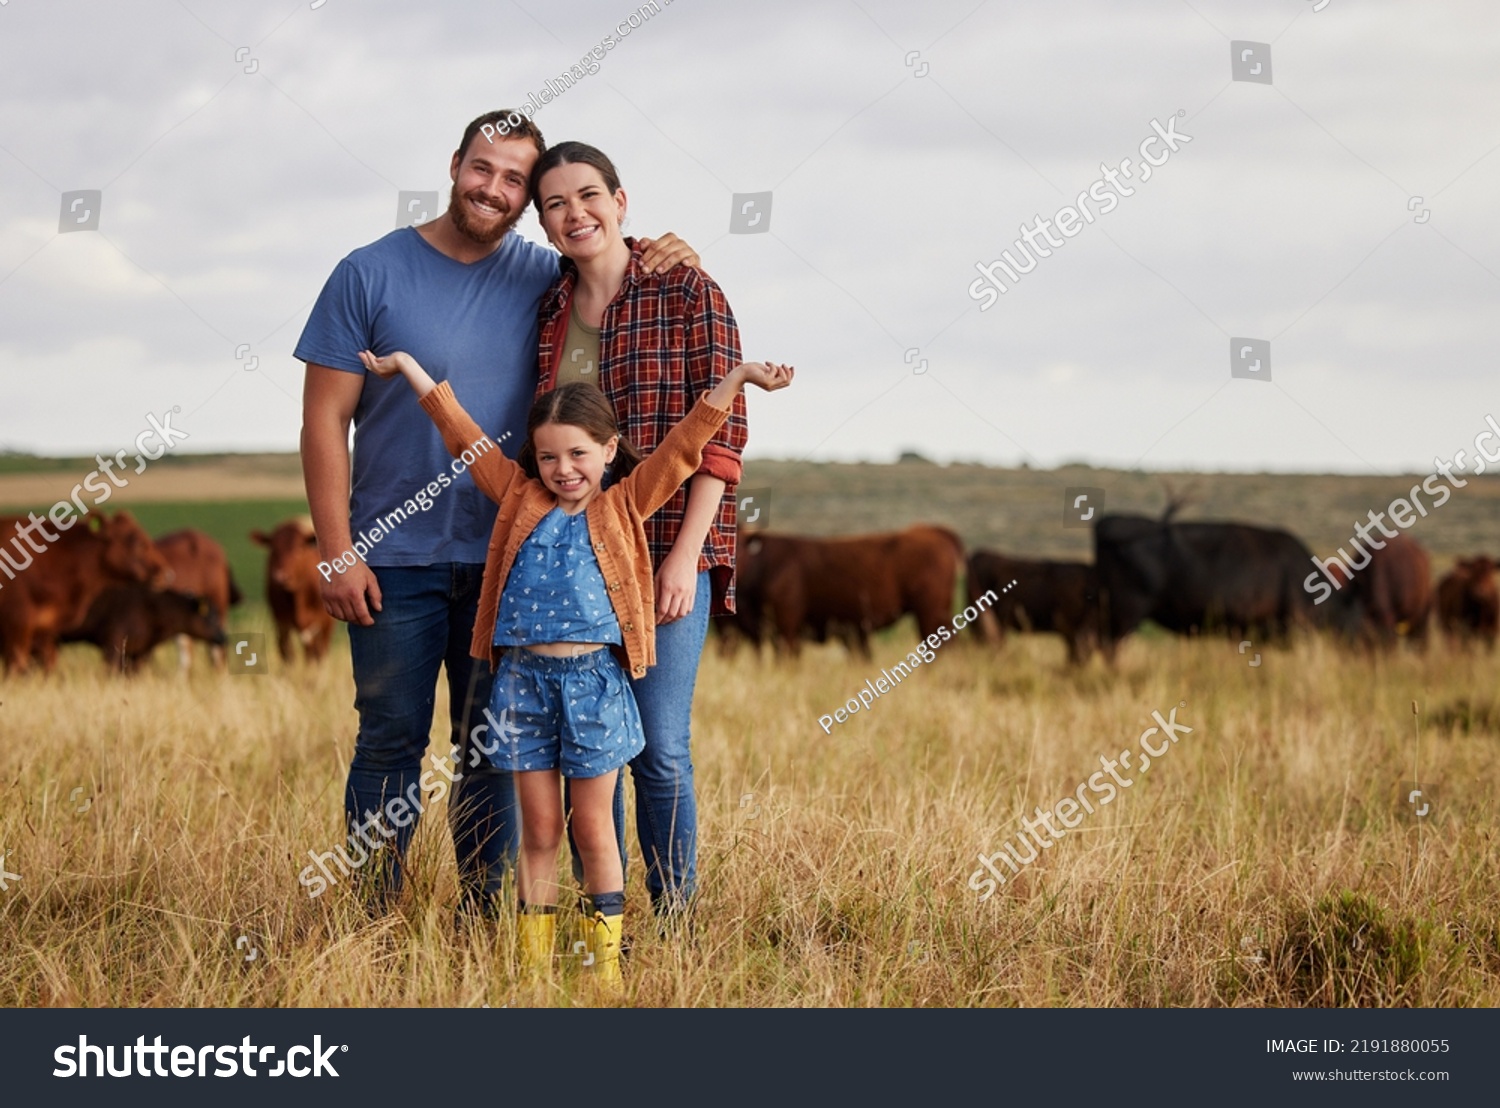 Happy family standing on a farm, cow in background and with a vision for growth in industry portrait. Countryside couple, people or farmer in a field of grass, cattle and free range livestock #2191880055